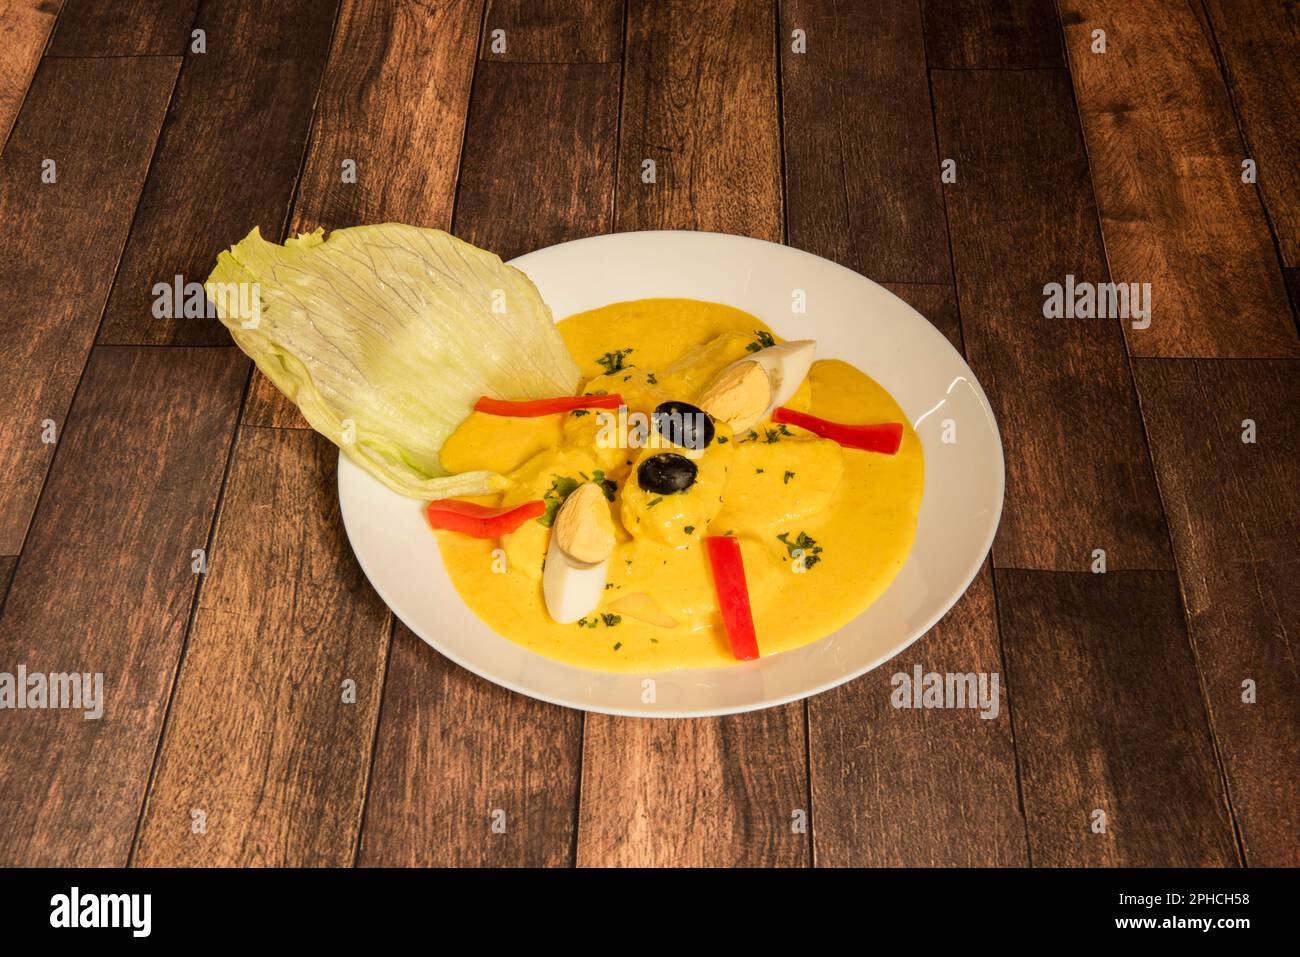 The elaboration consists of the preparation of a sauce whose base is fresh cheese and yellow chili. Evaporated milk and oil are added to form the semi Stock Photo